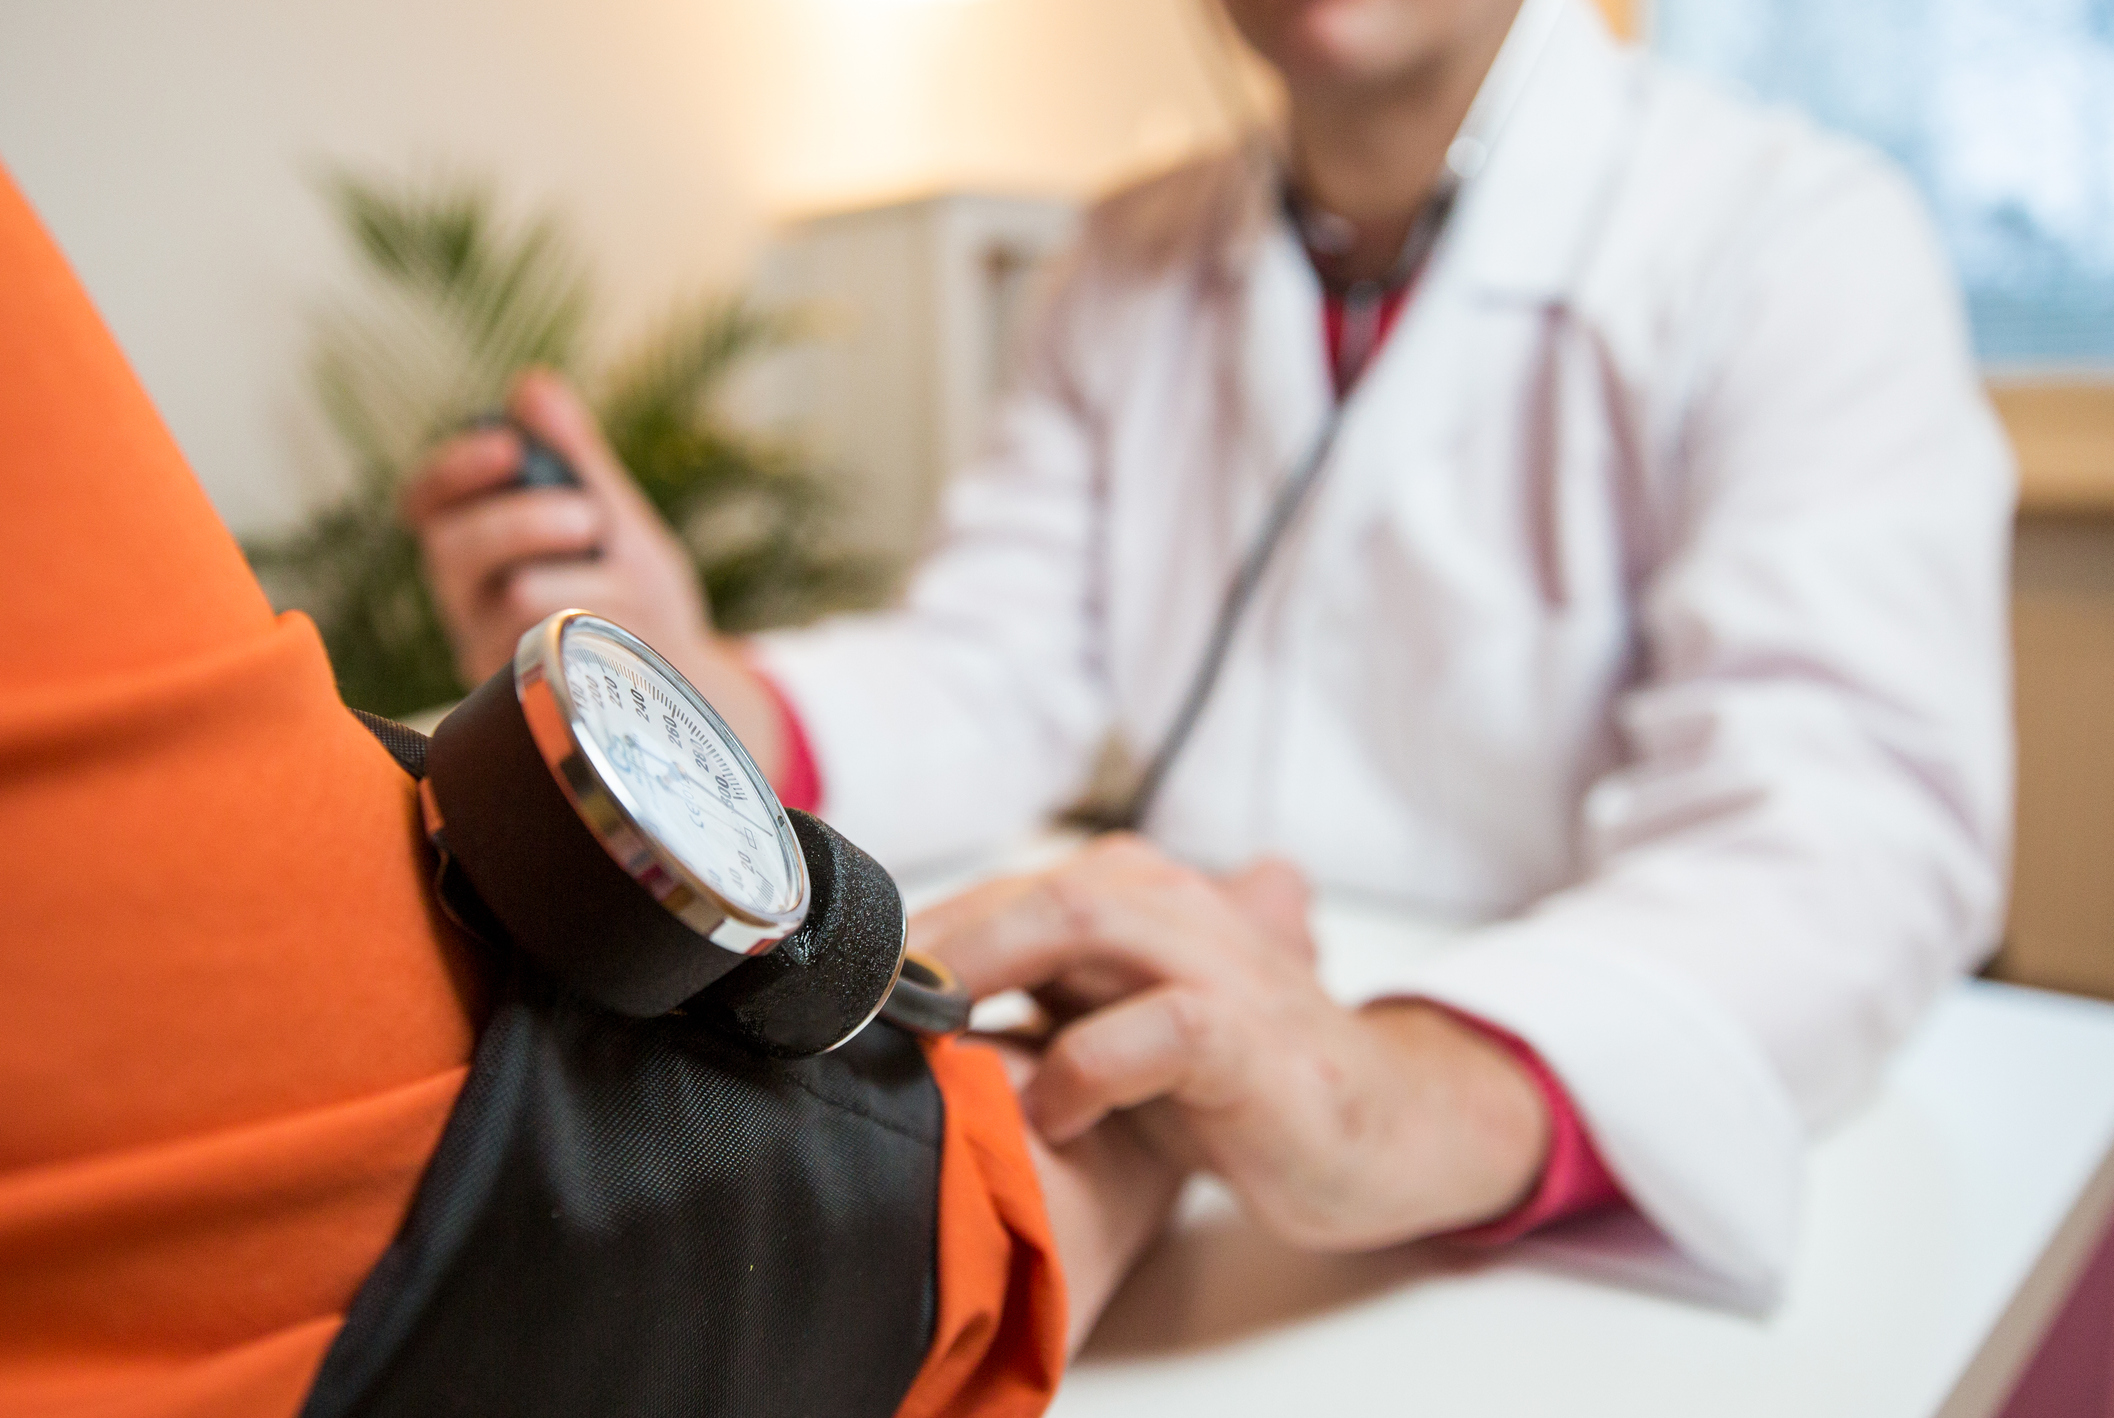 Should you be tested for a hypertension-causing tumor?